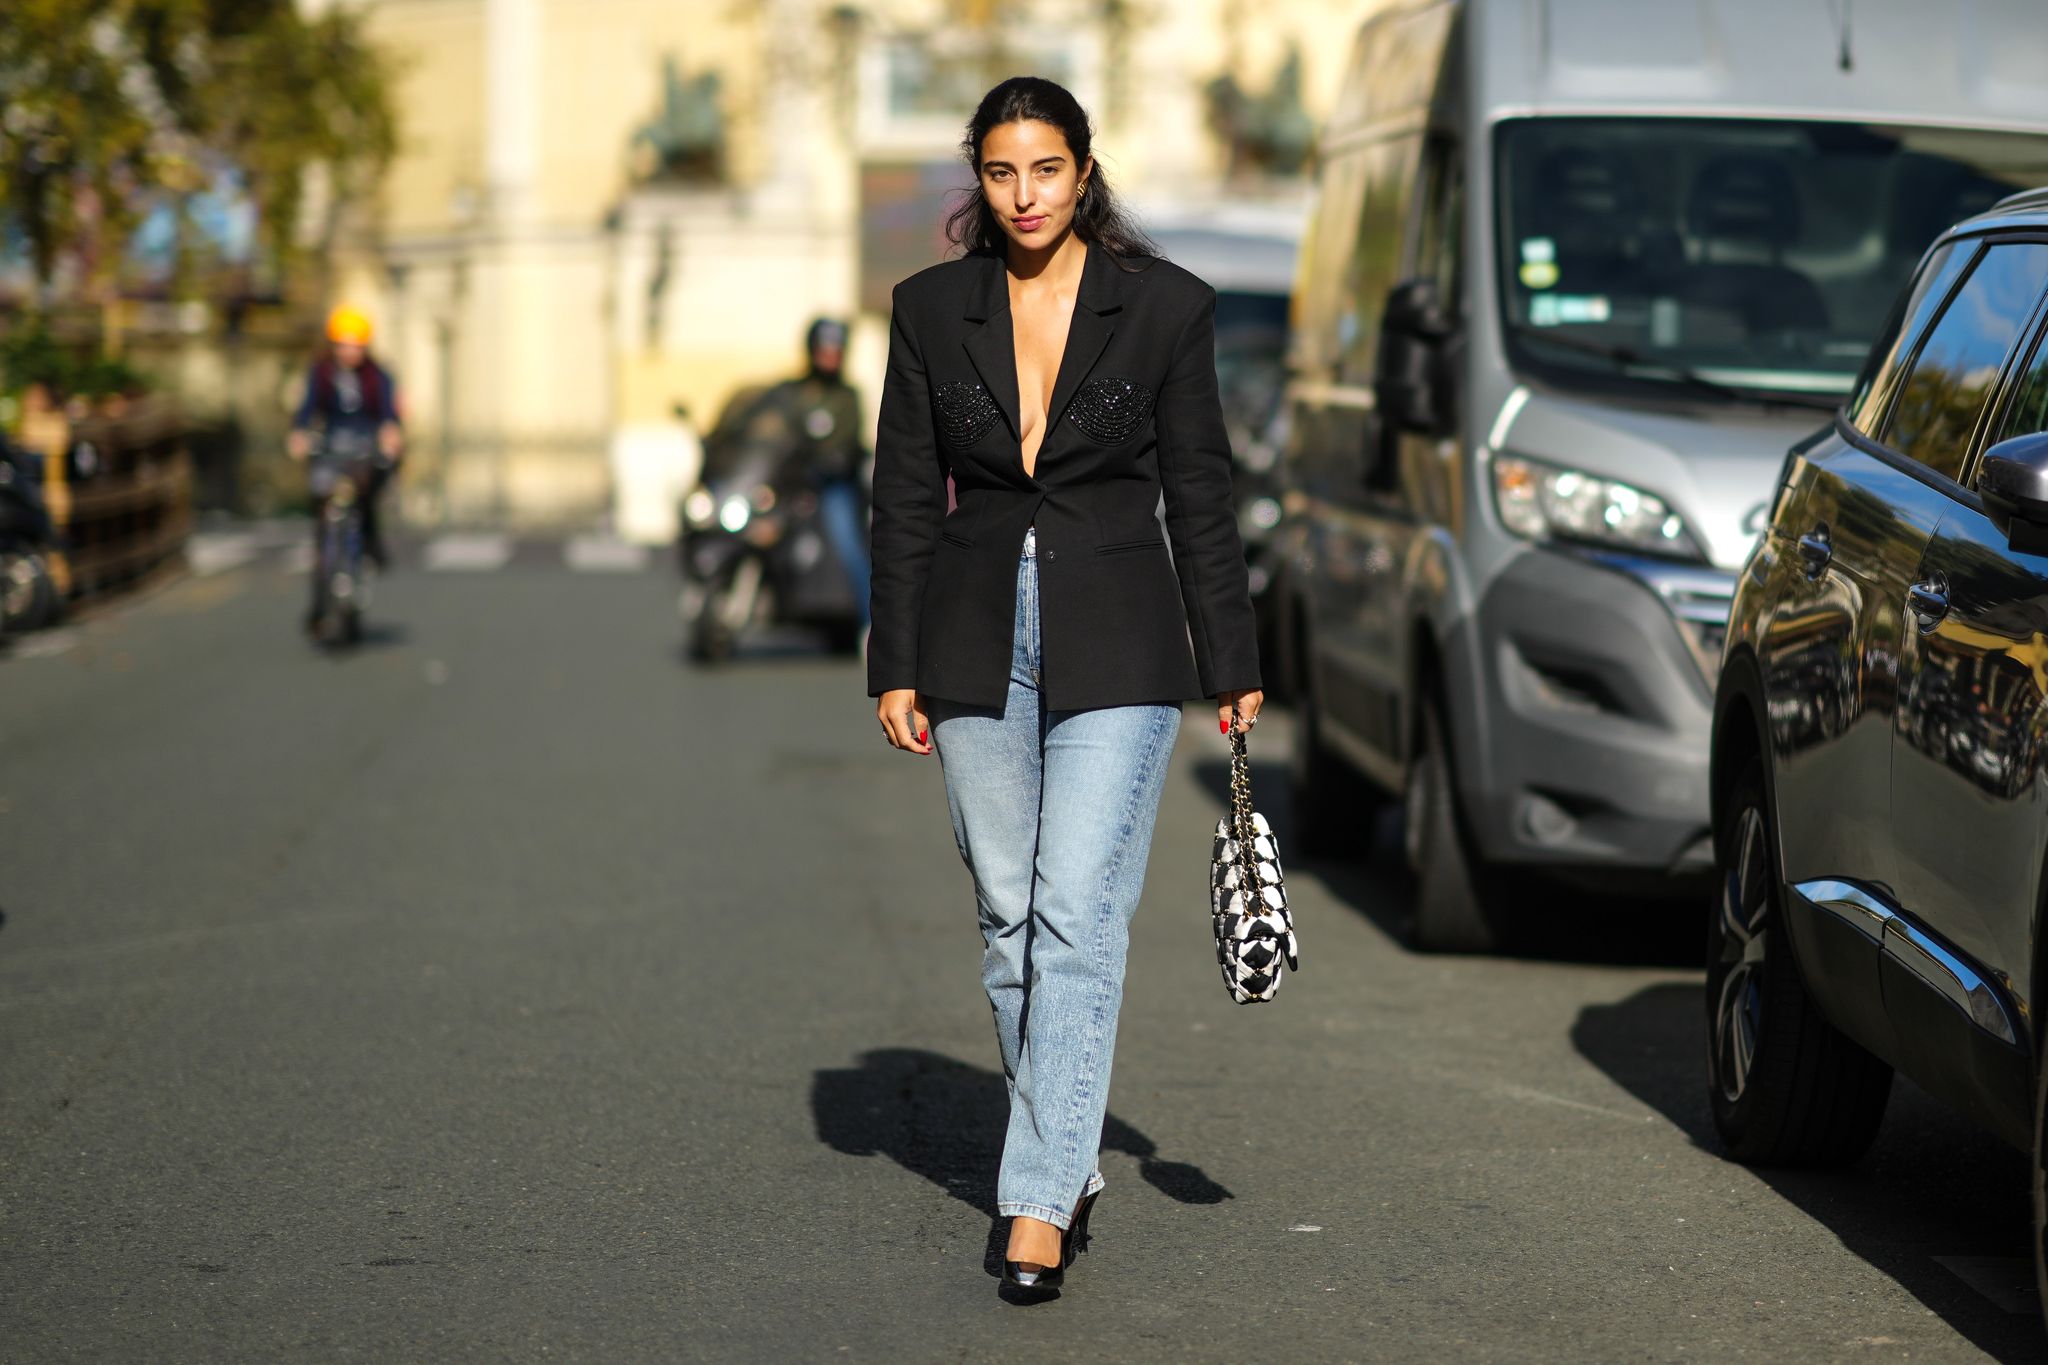 paris, france september 29 bettina looney wears a gold large earring, a black blazer jacket with sequined yoke, high waist blue faded large denim jeans pants, a black and white checkered pattern handbag from chanel, black shiny leather pointed pumps heels shoes, rings, outside cecilie bahnsen, during paris fashion week womenswear spring summer 2022, on september 29, 2021 in paris, france photo by edward berthelotgetty images